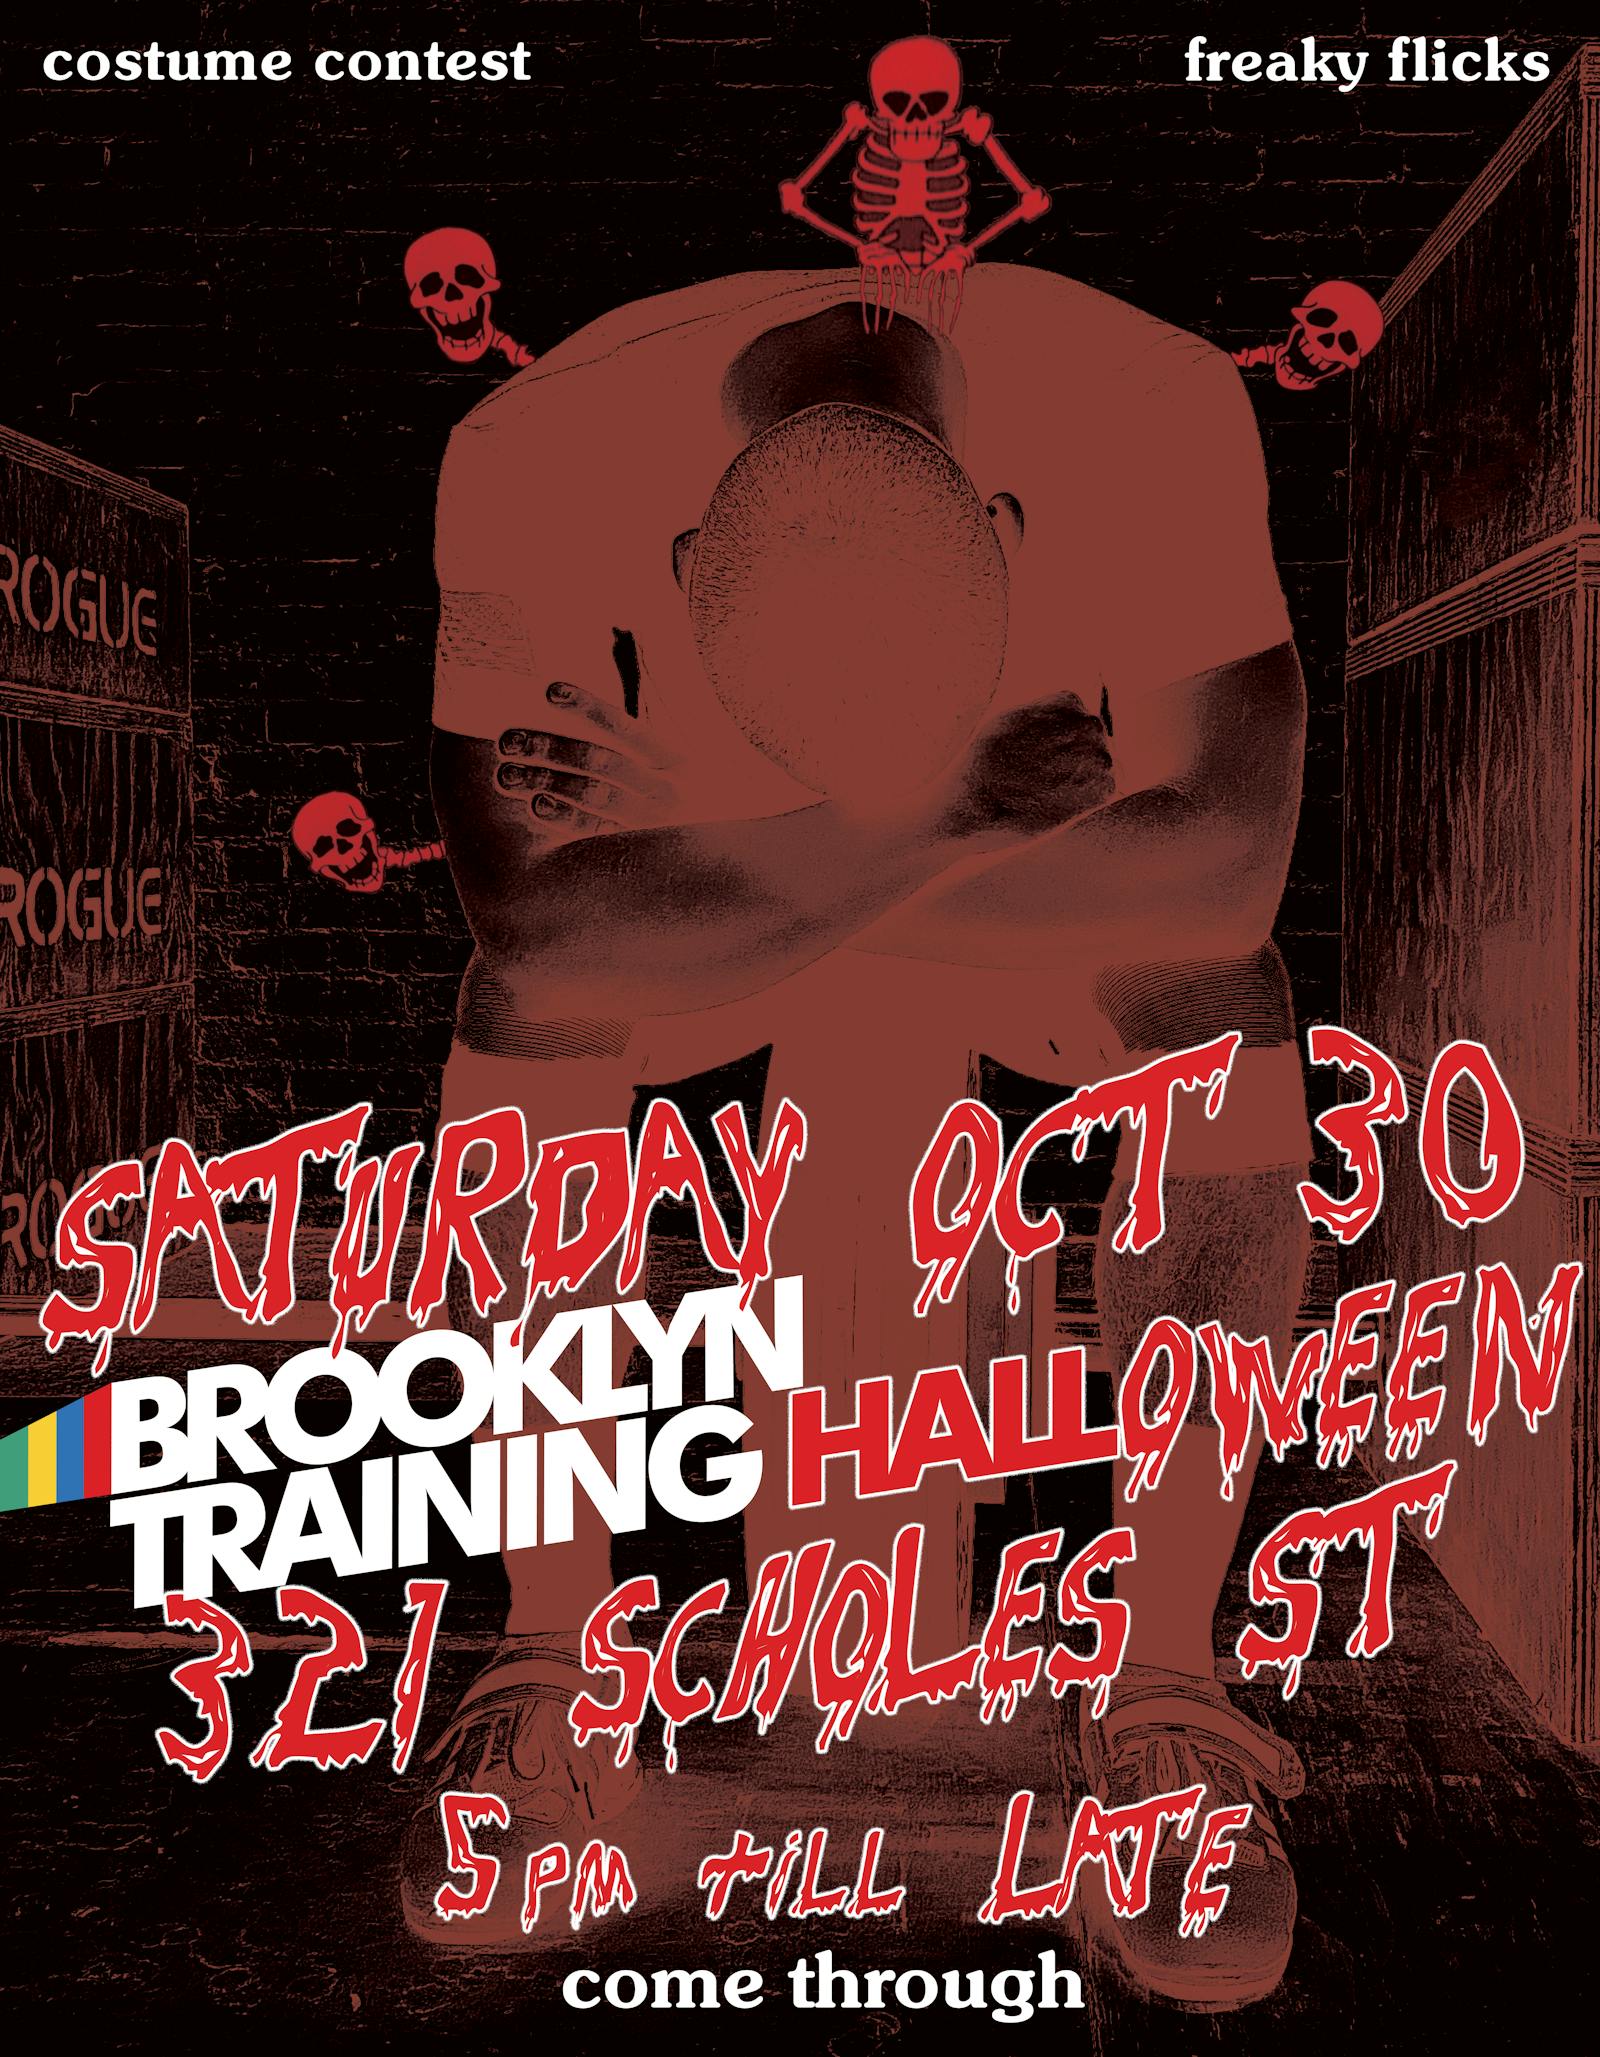 👻 The Brooklyn Training Hall-OWEEN Party 🎃